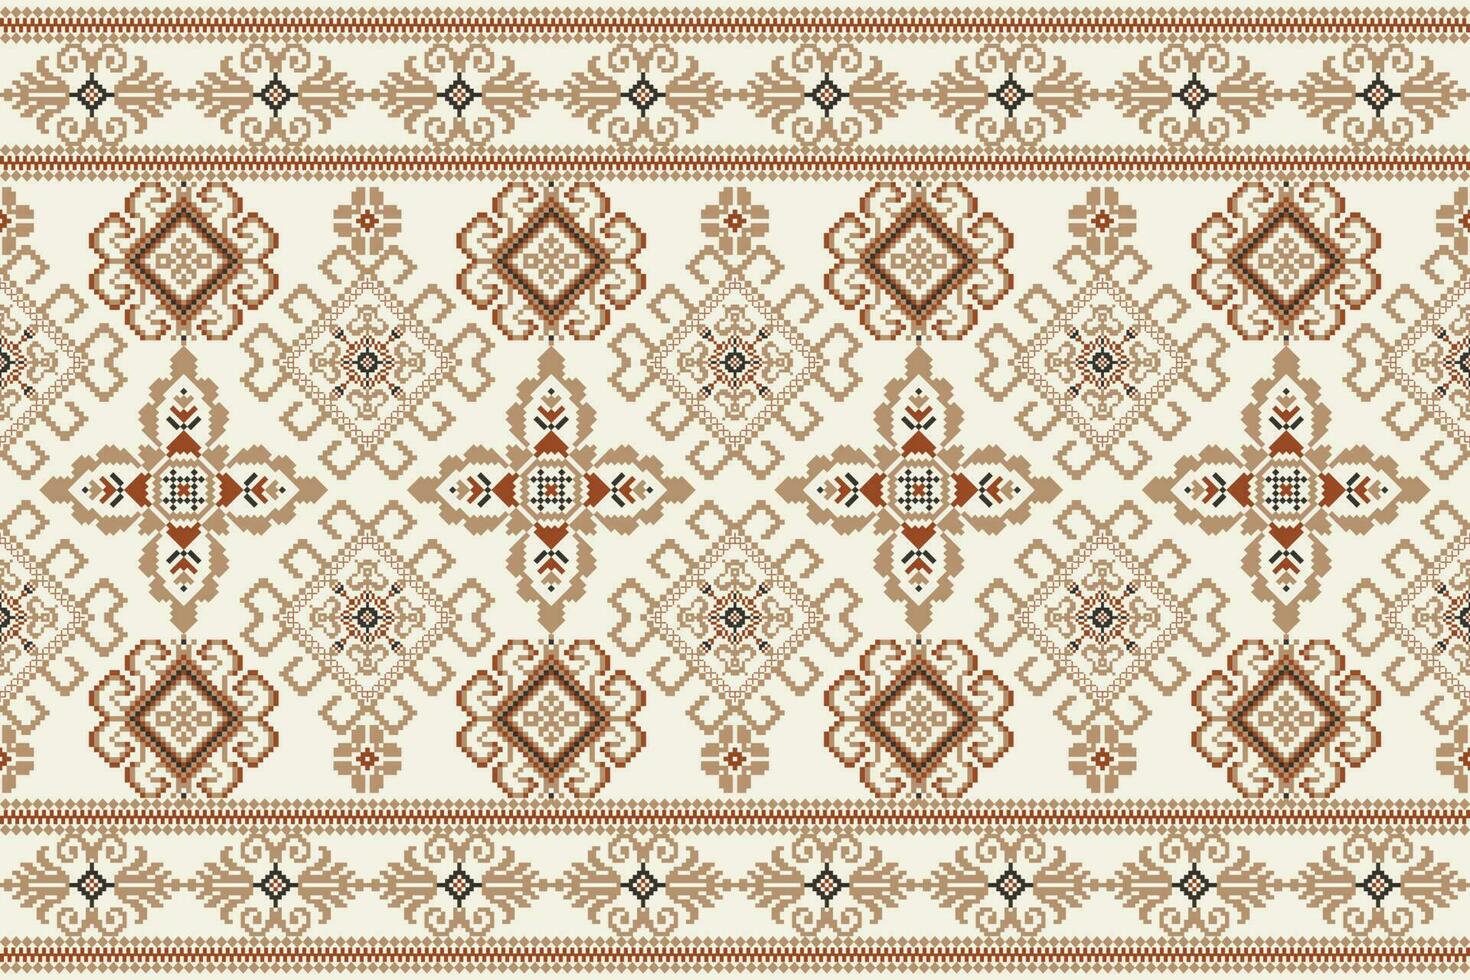 Geometric floral cross stitch embroidery on white background.ethnic oriental pattern traditional.Aztec style abstract vector illustration.design for texture,fabric,clothing,wrapping,decoration,scarf.